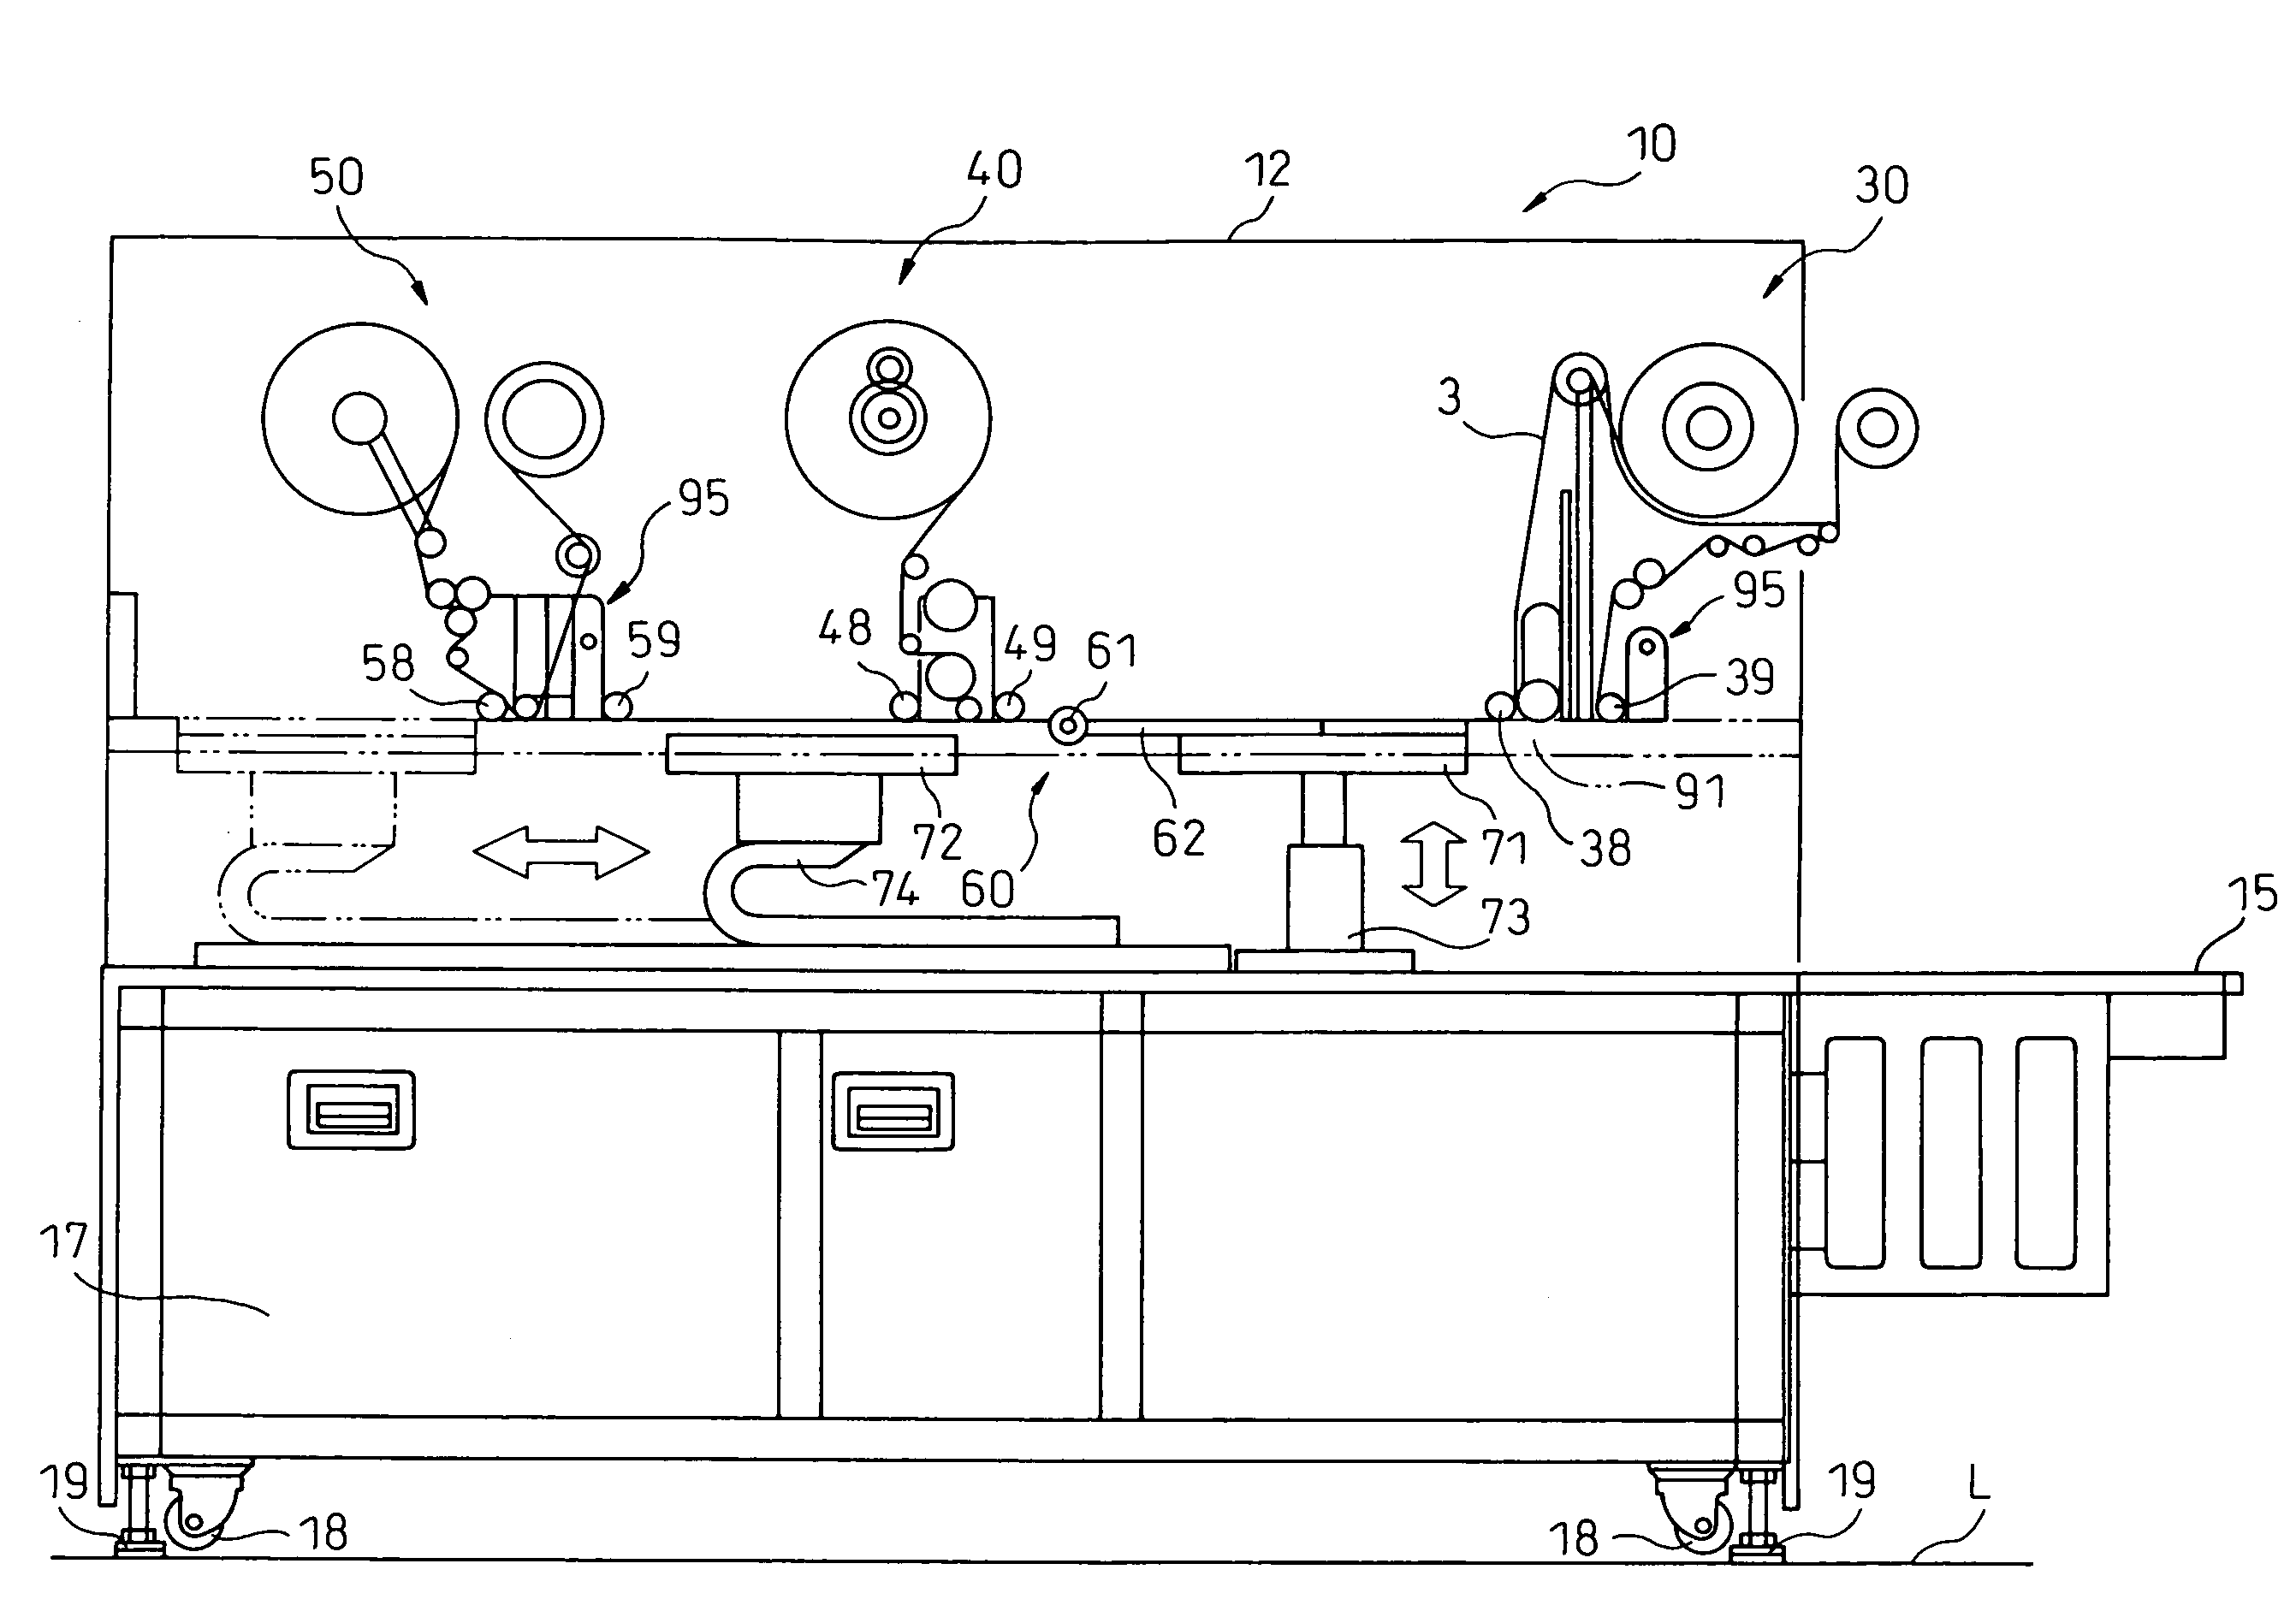 Wafer processing apparatus